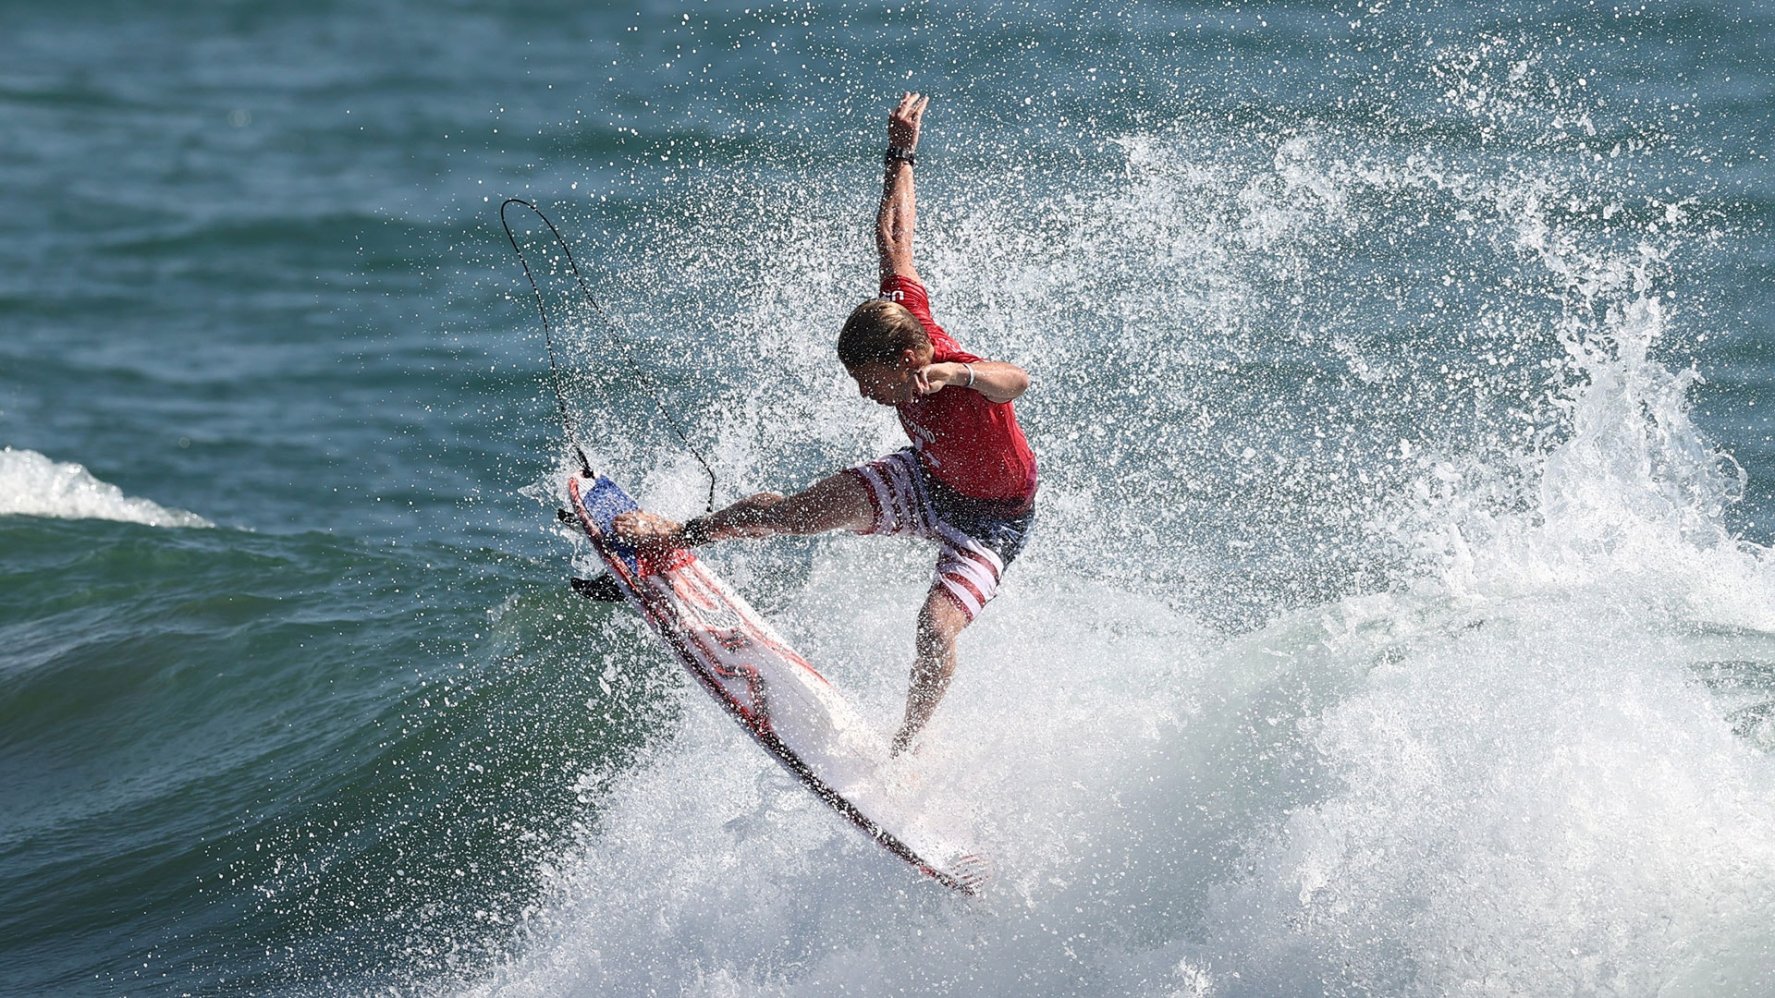 USA’s Andino Advances Straight to Round 3 in Inaugural Olympic Surfing